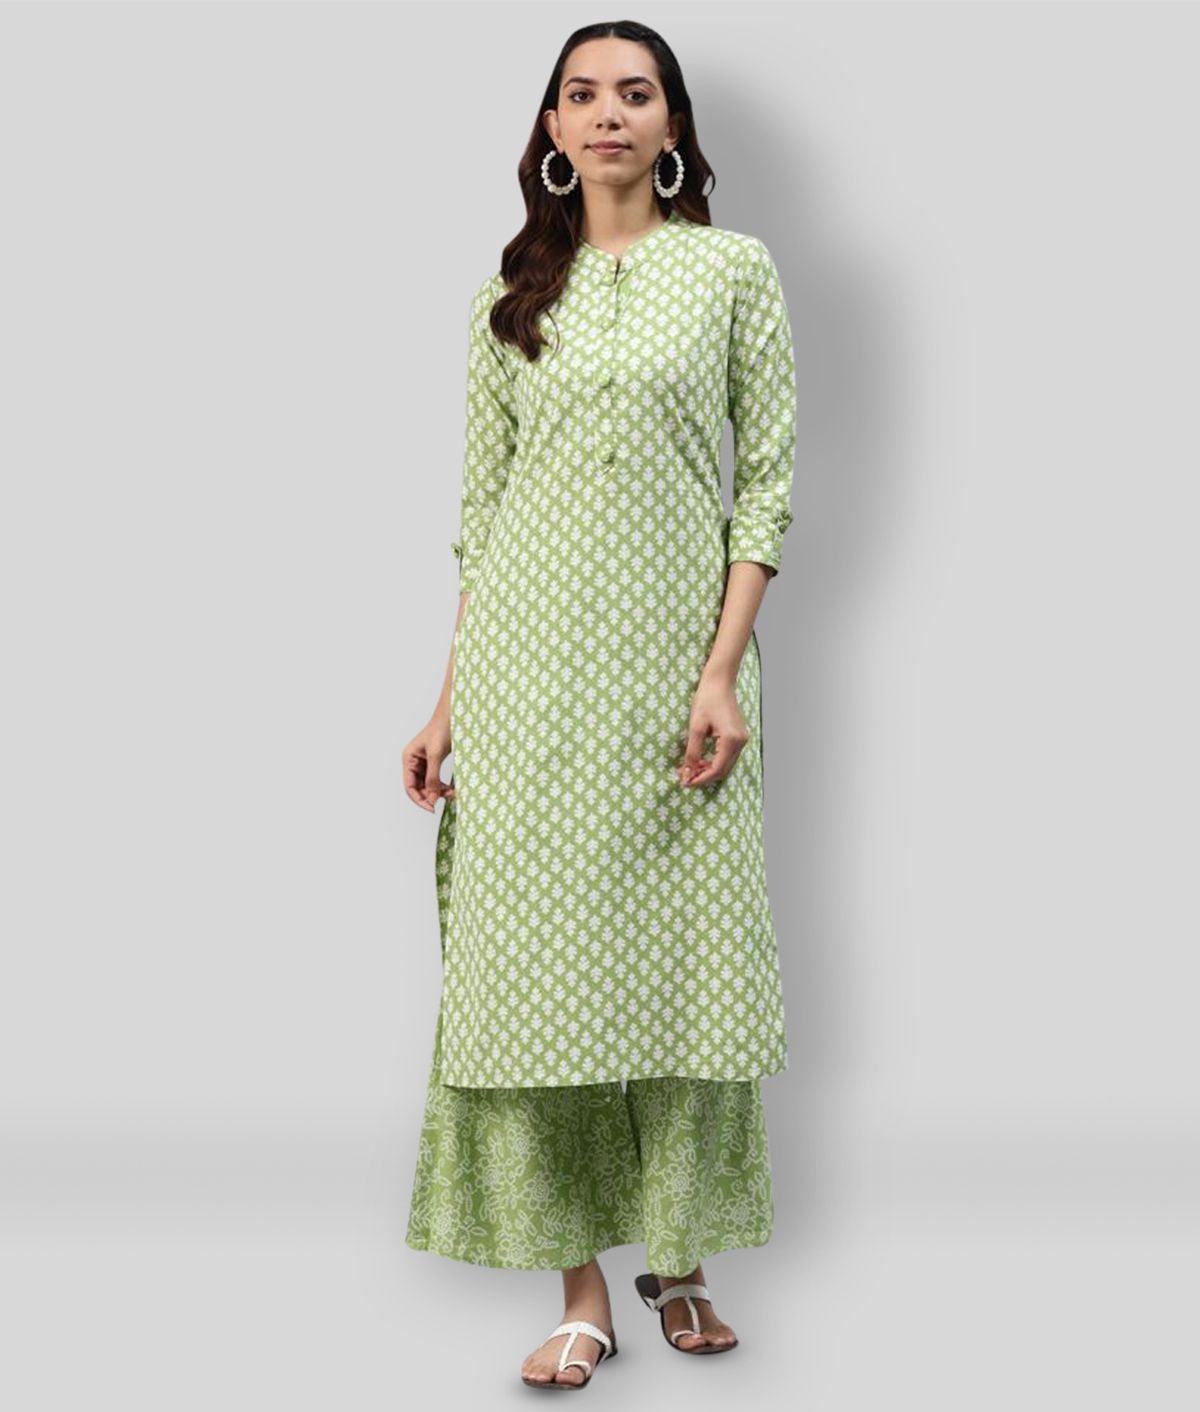     			HIGHLIGHT FASHION EXPORT - Green Straight Cotton Women's Stitched Salwar Suit ( Pack of 1 )